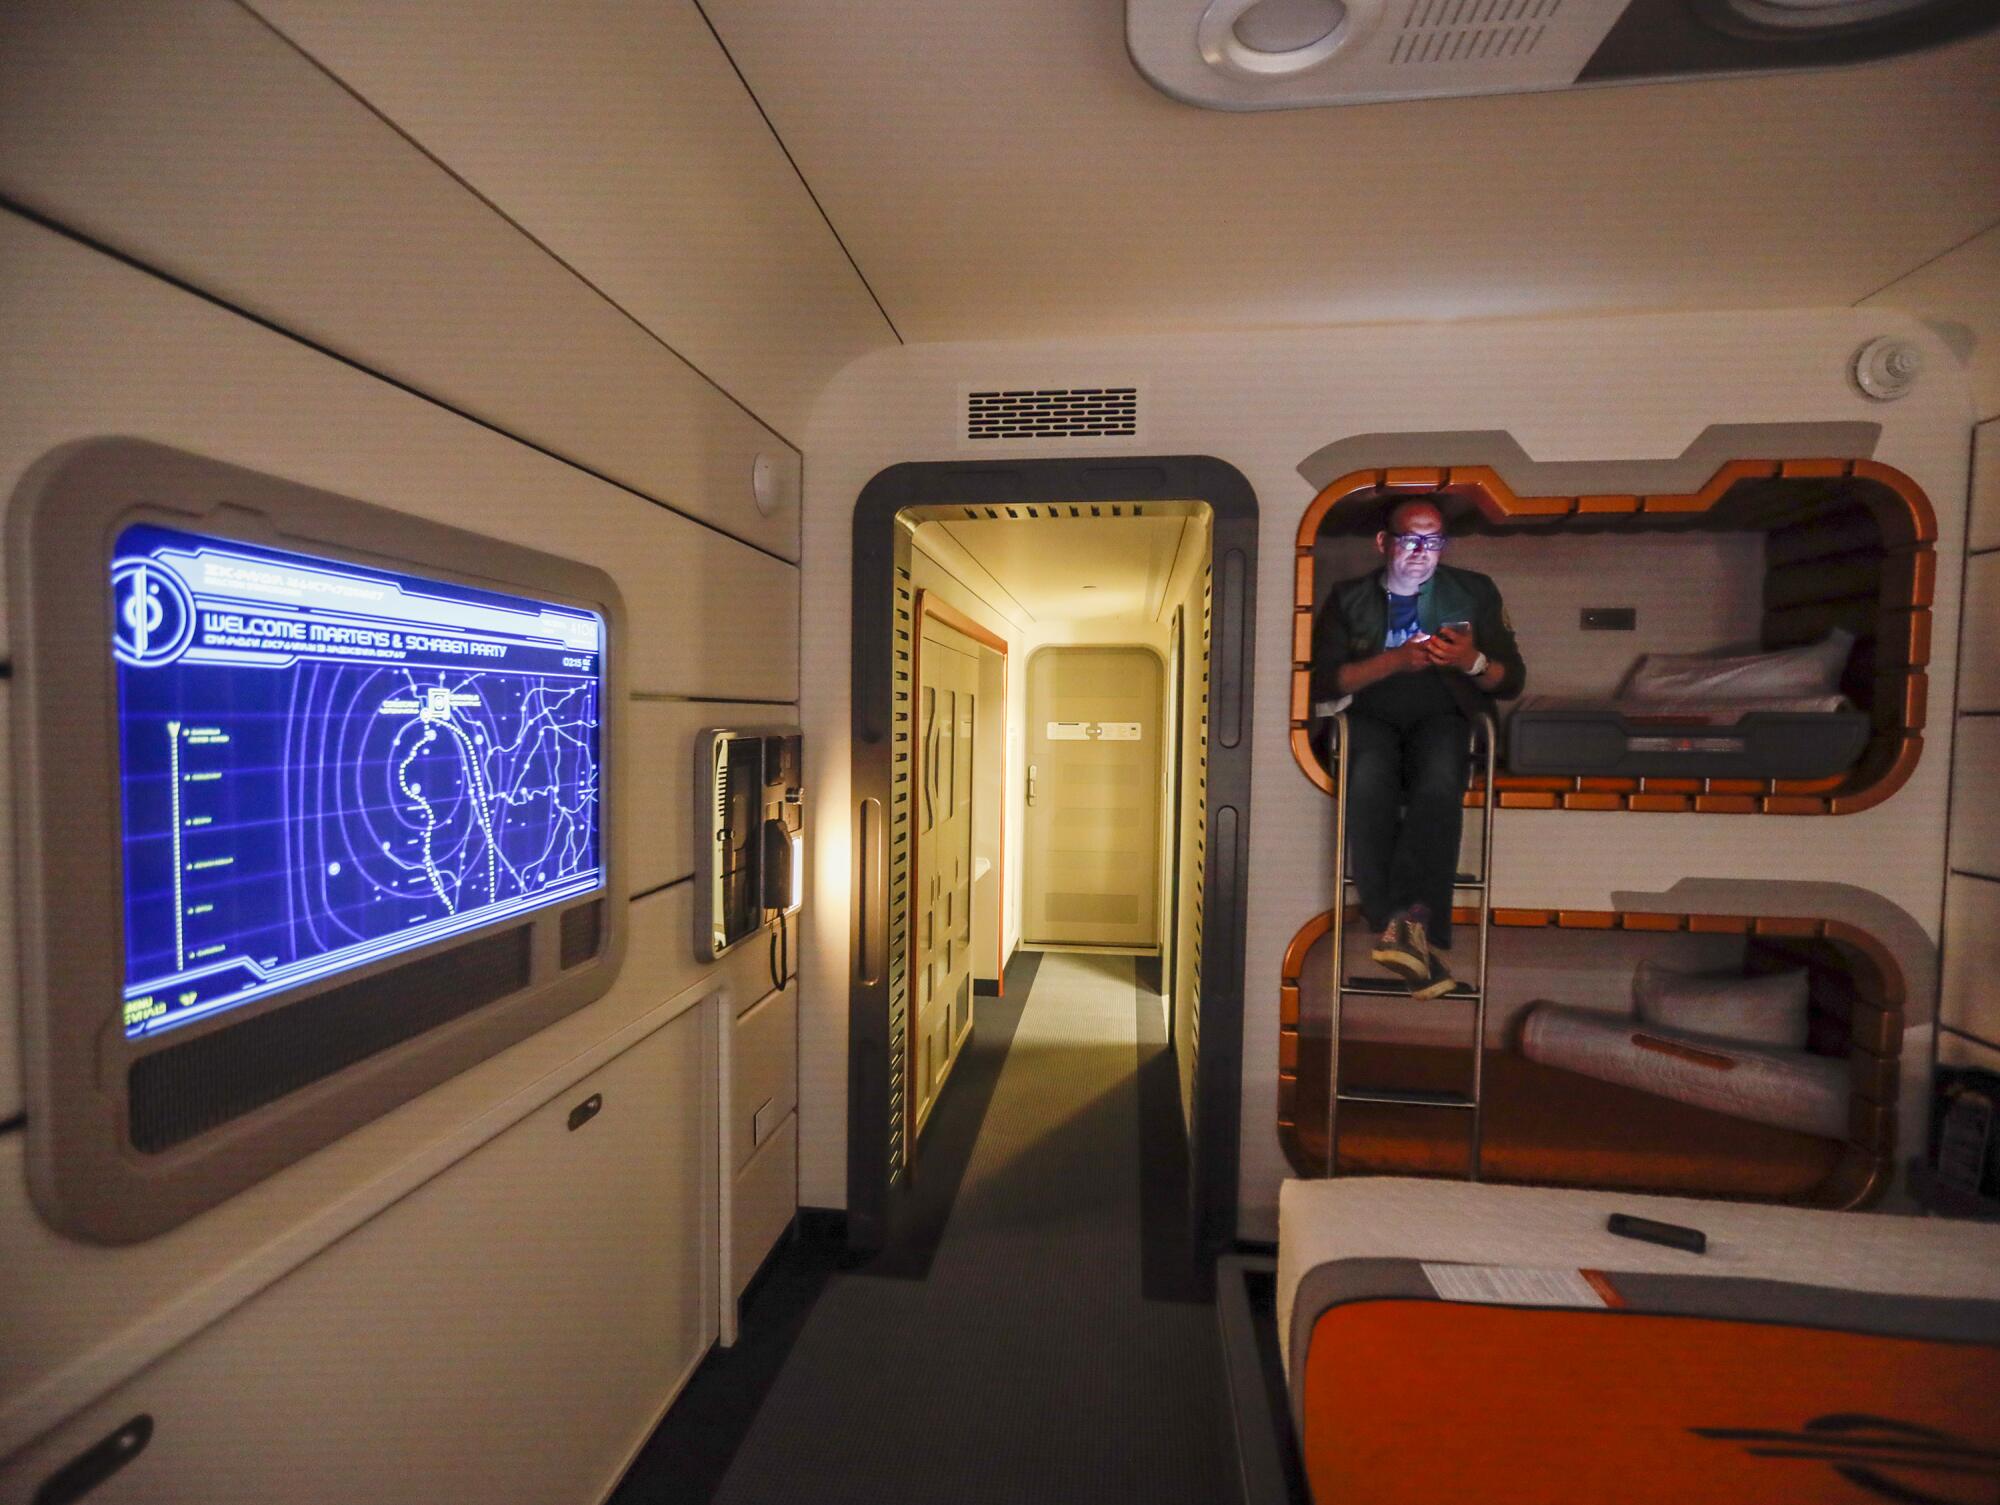 Martens sits in one of the bunk beds inside a standard room aboard the Galactic Starcruiser.